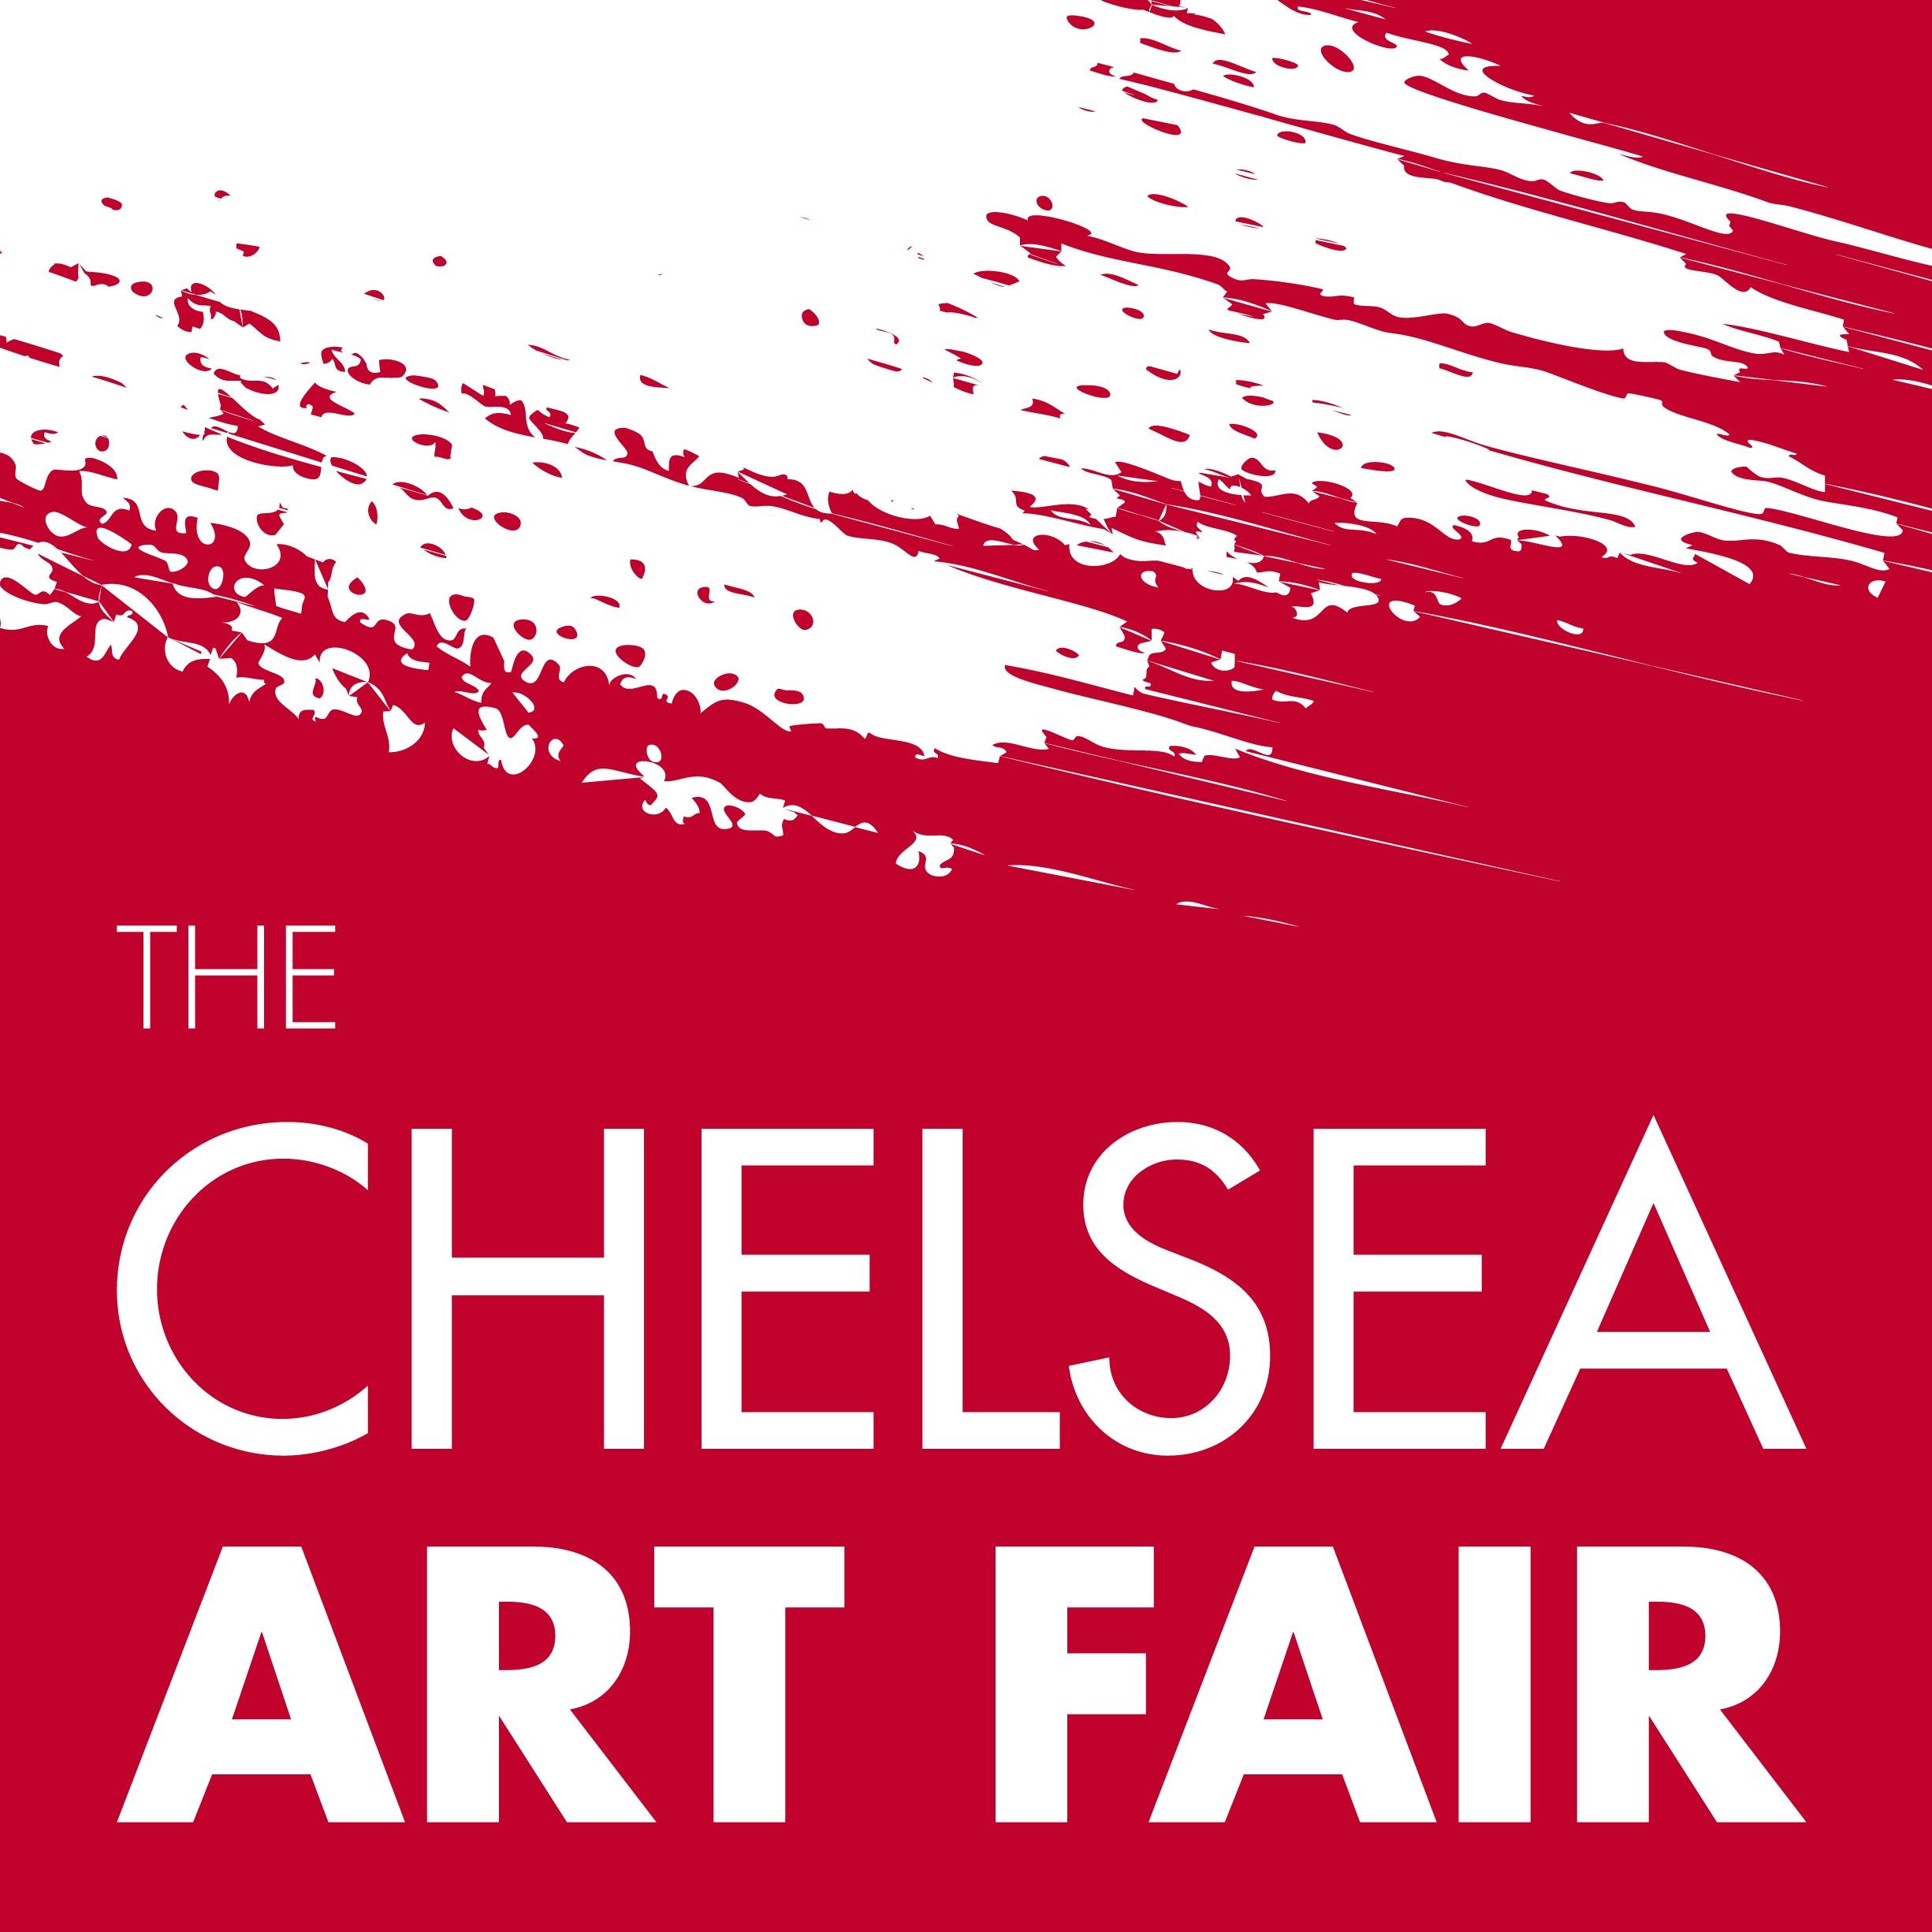 The 22nd Chelsea Art Fair takes place between April 27th-30th, 2017 offering contemporary & modern works of art from respected UK galleries.